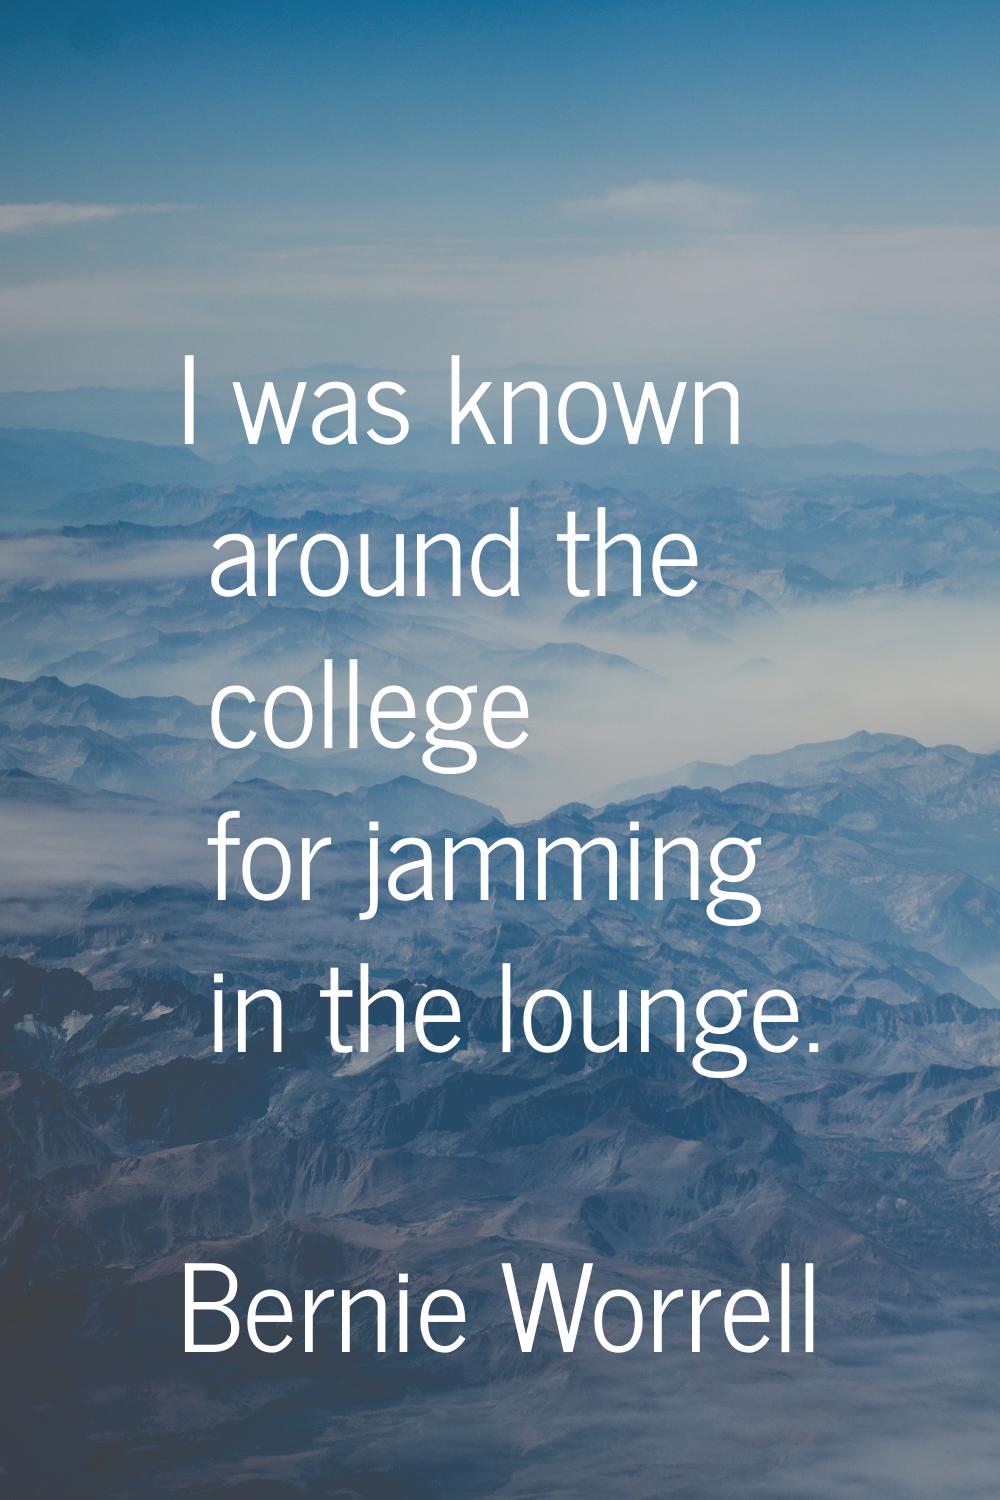 I was known around the college for jamming in the lounge.